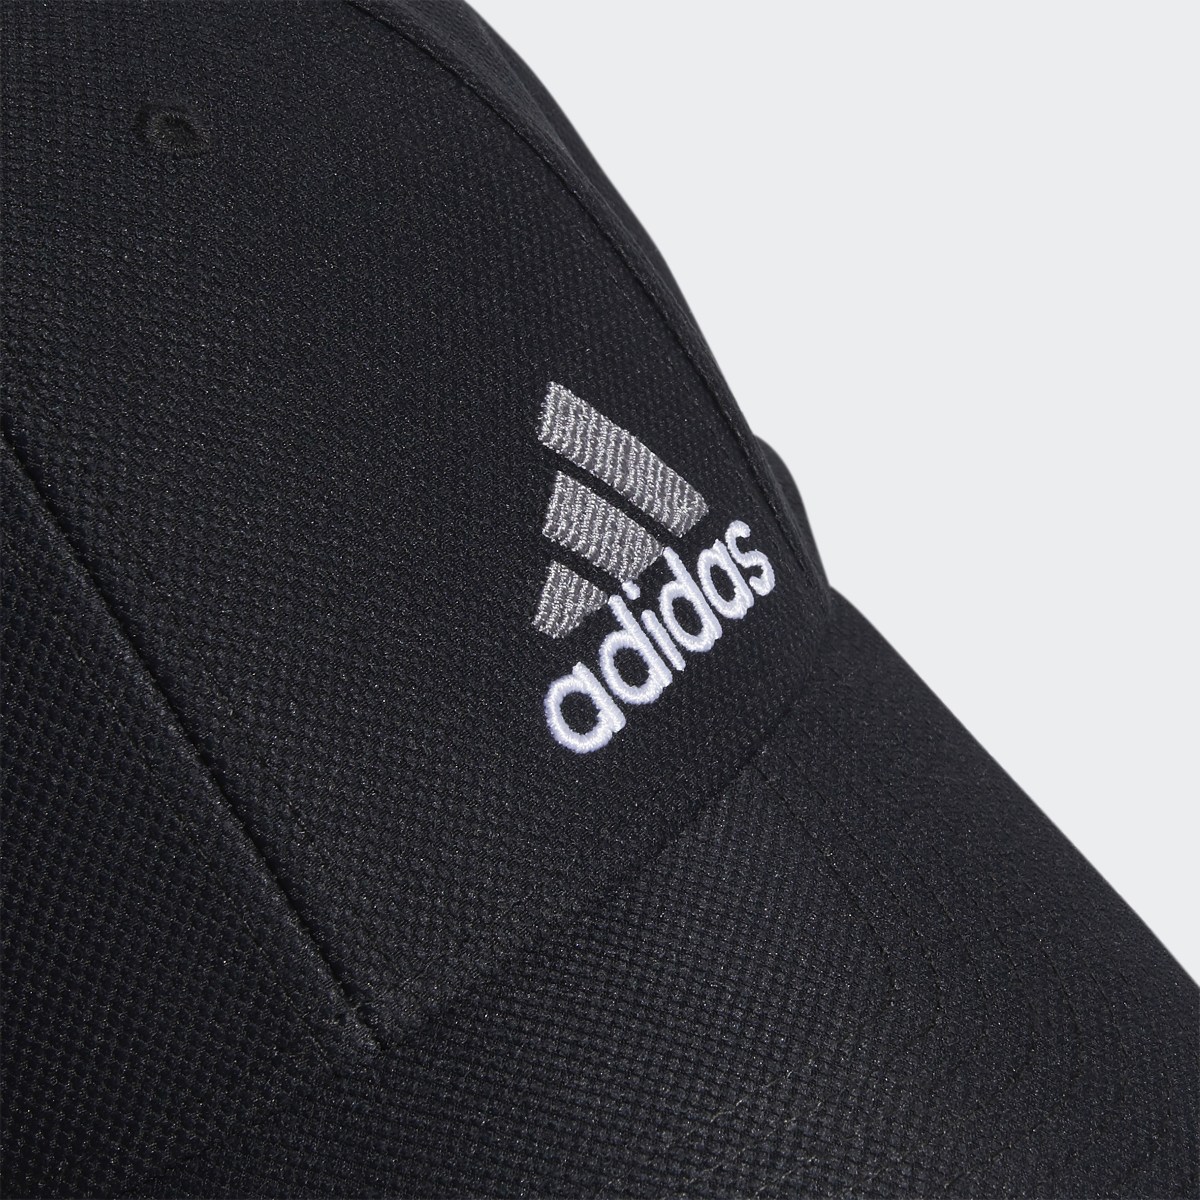 Adidas Release Stretch Fit Hat. 5